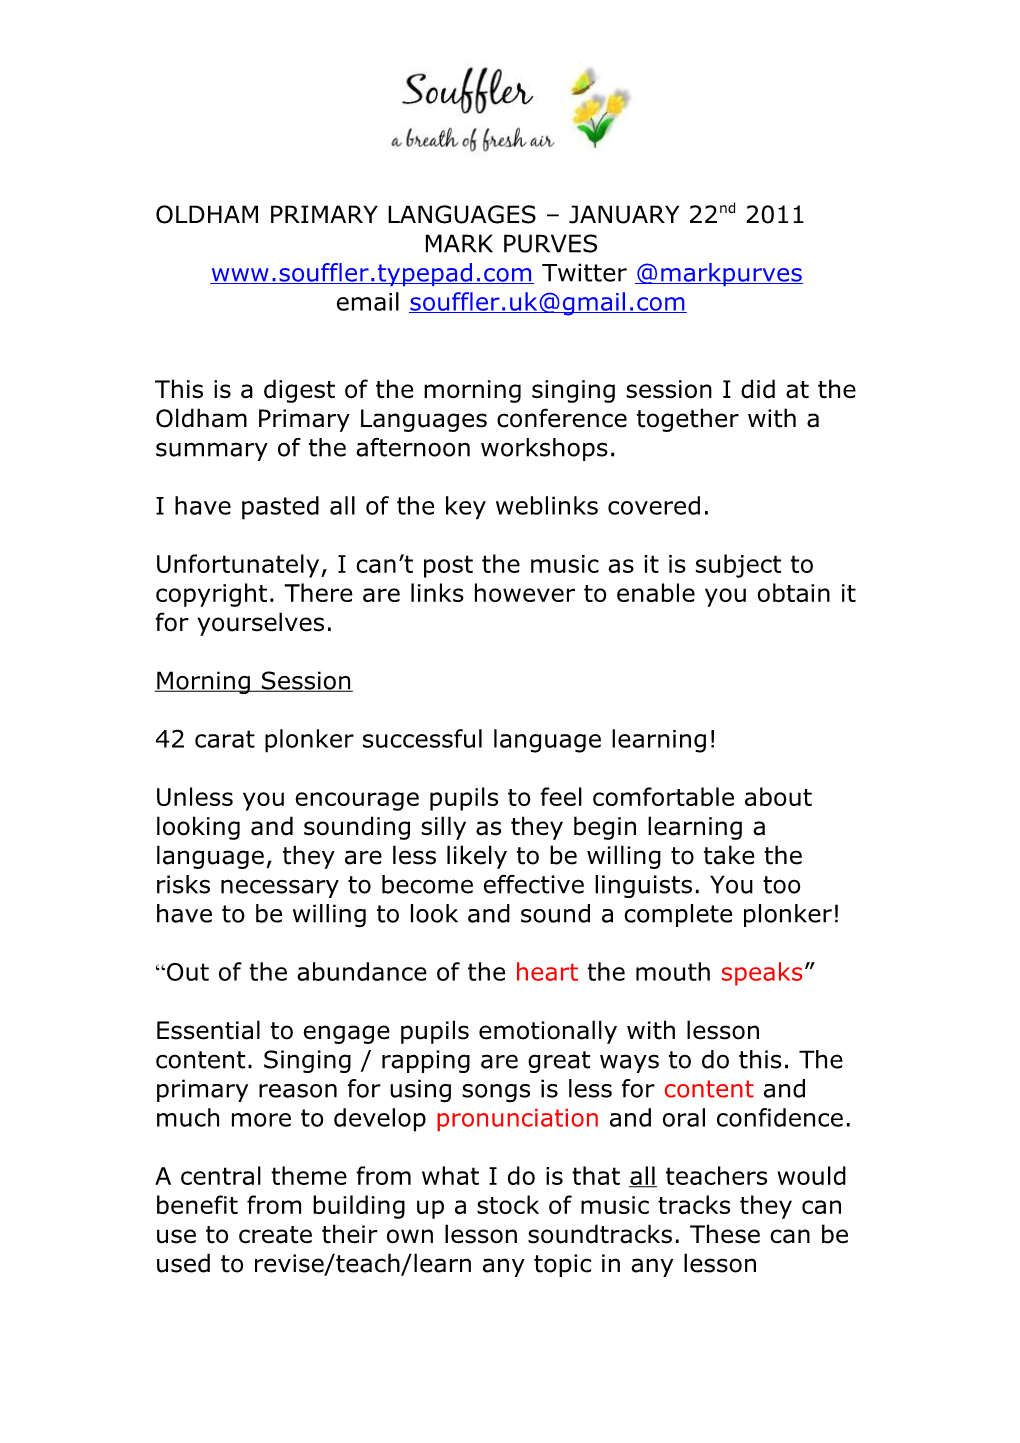 This Is a Brief Digest of the Morning Singing Session I Did at the Oldham Primary Languages